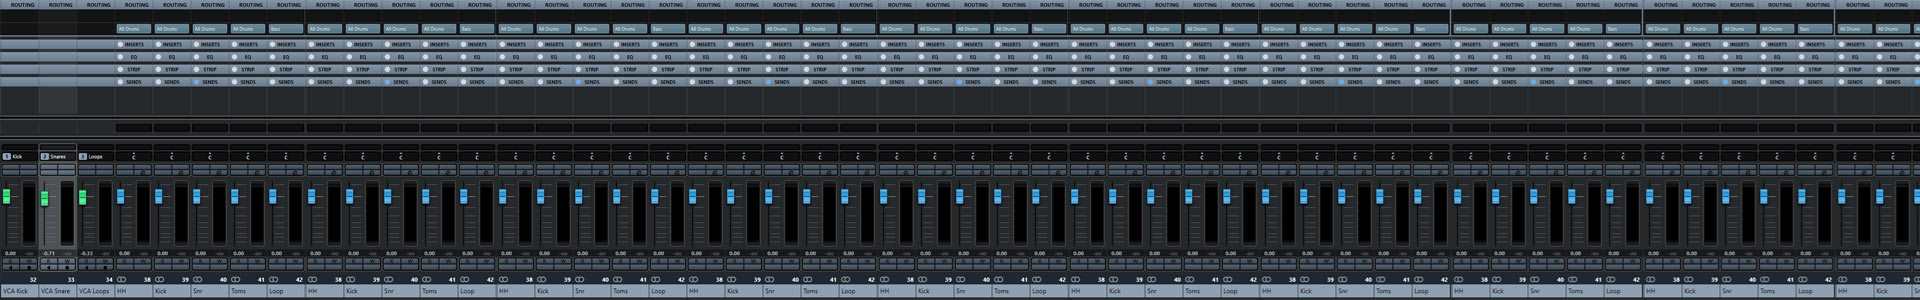 Gain Staging in your DAW to healthy levels and work smarter with K-14